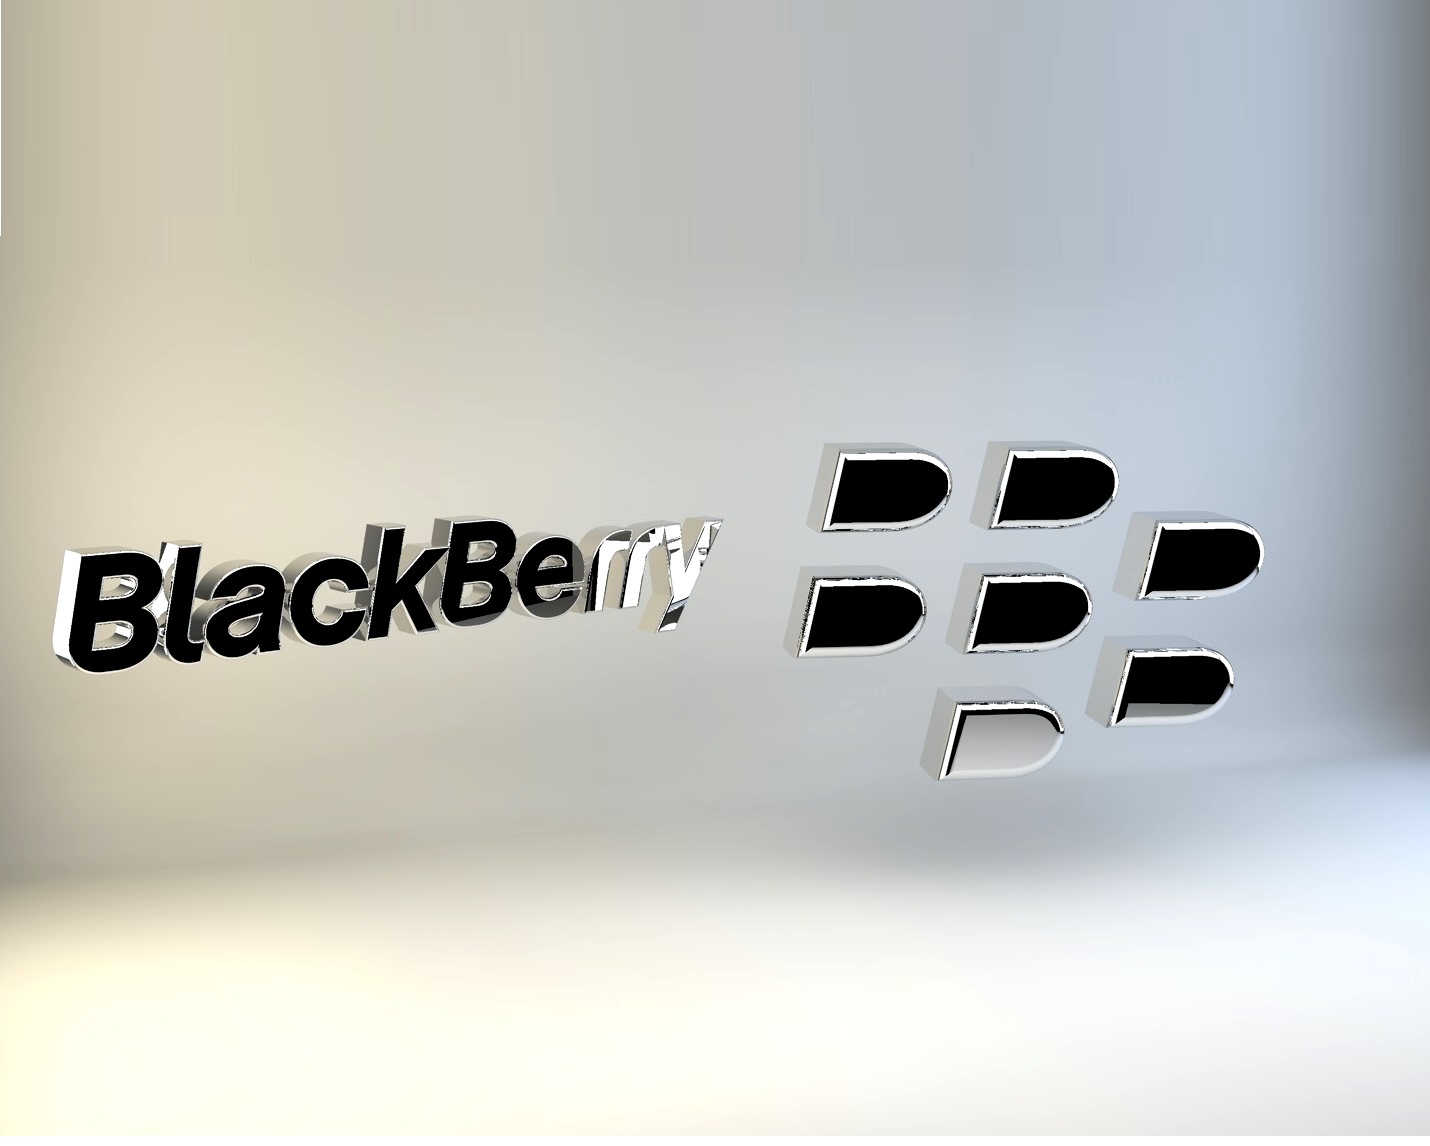 BlackBerry may go Private